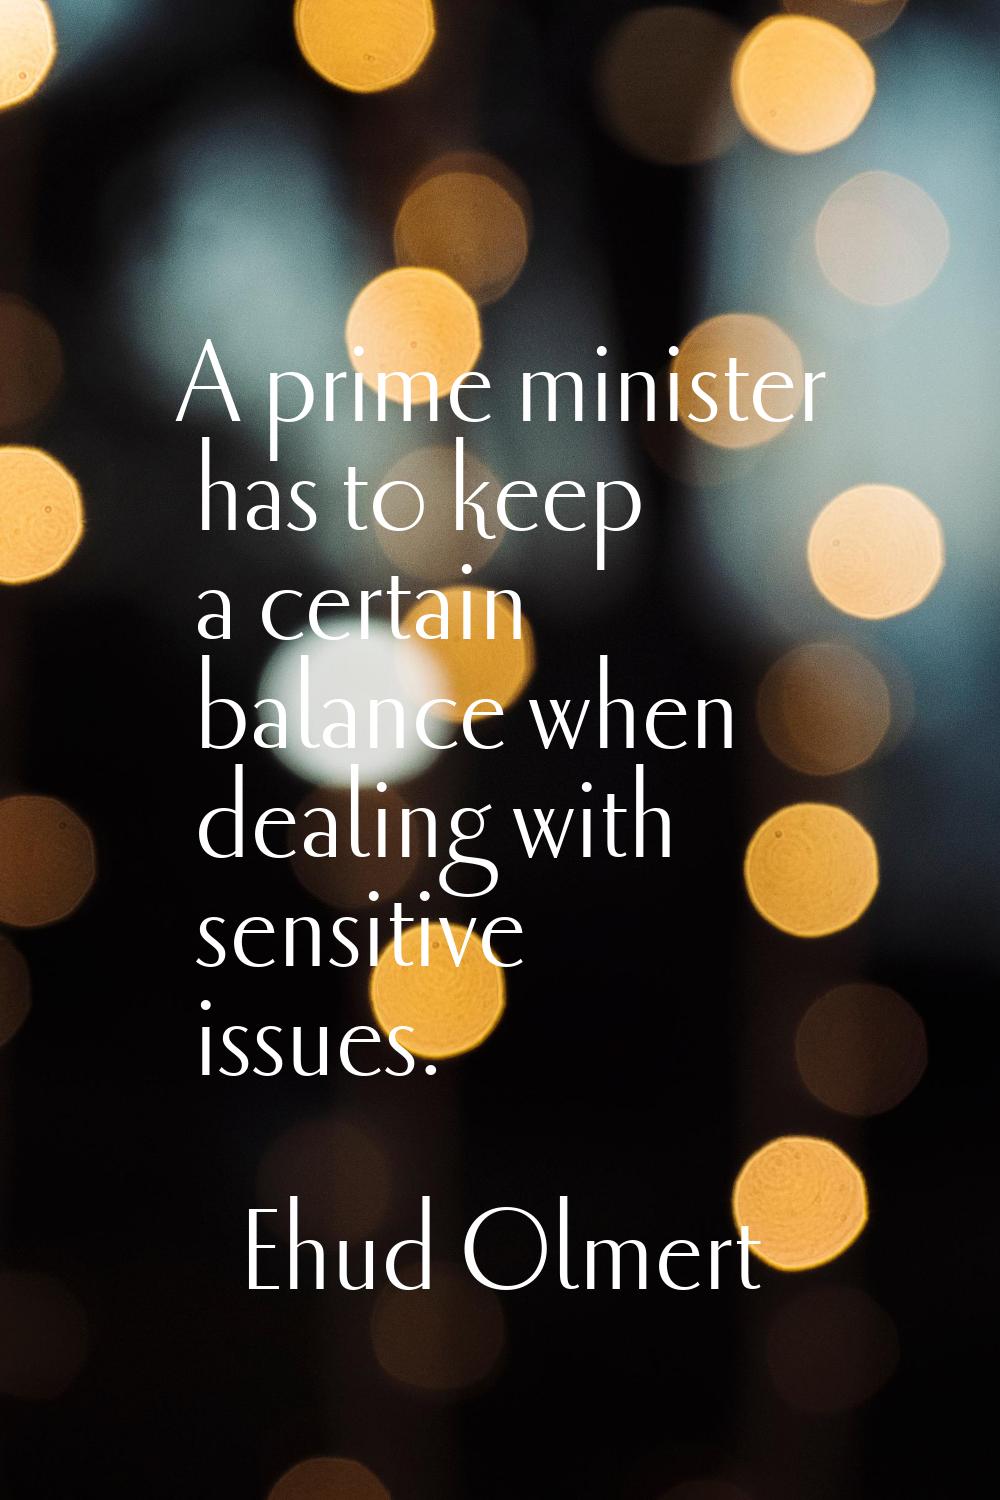 A prime minister has to keep a certain balance when dealing with sensitive issues.